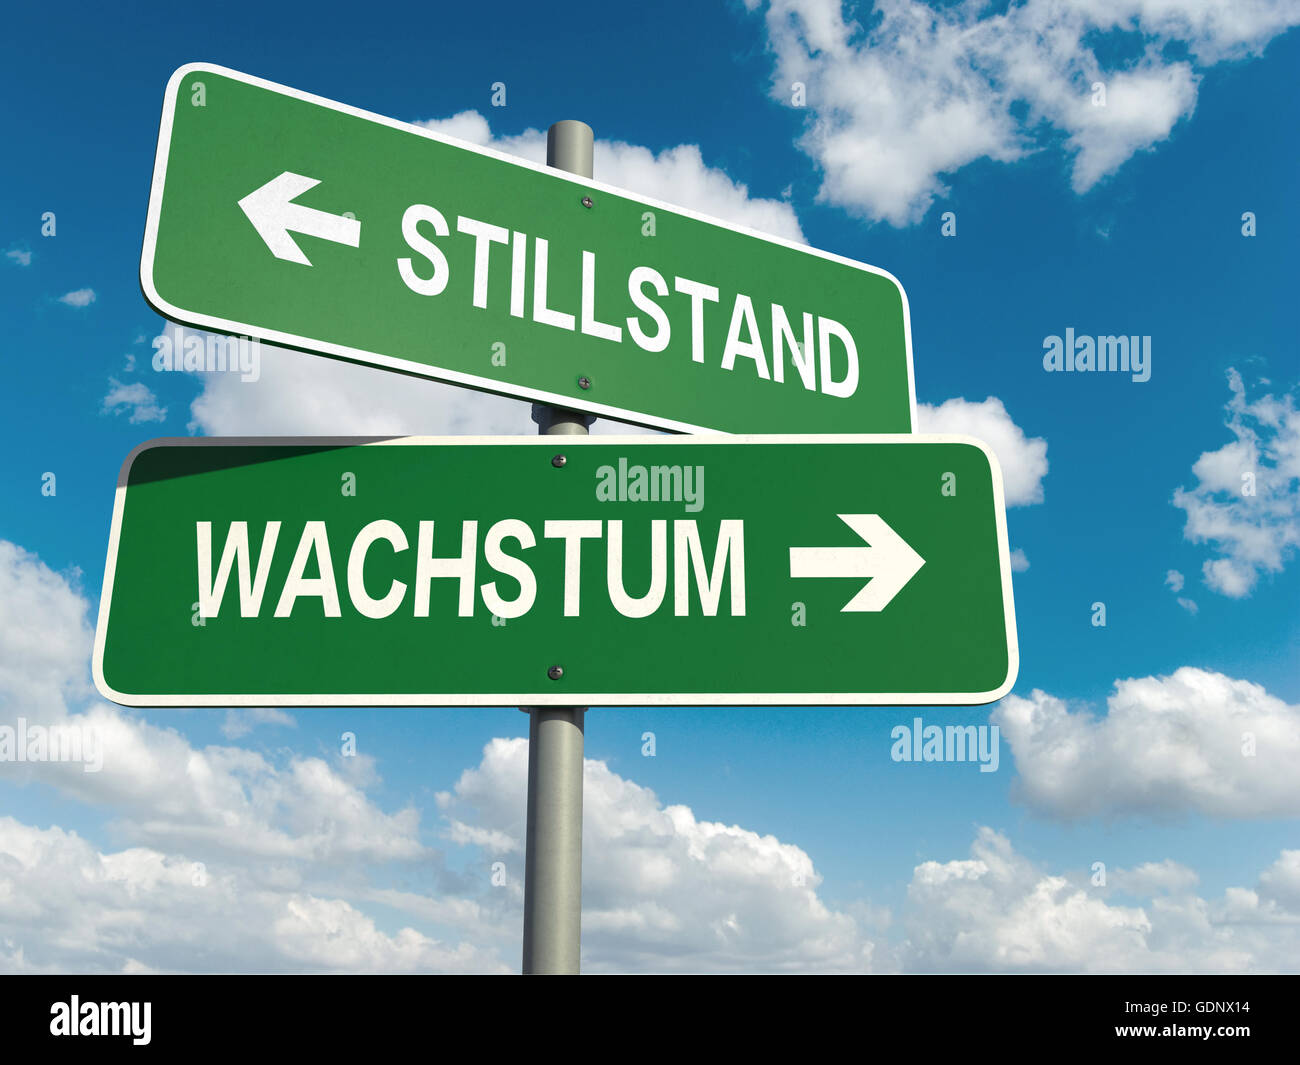 A road sign with stillstand wachstum words on sky background Stock Photo